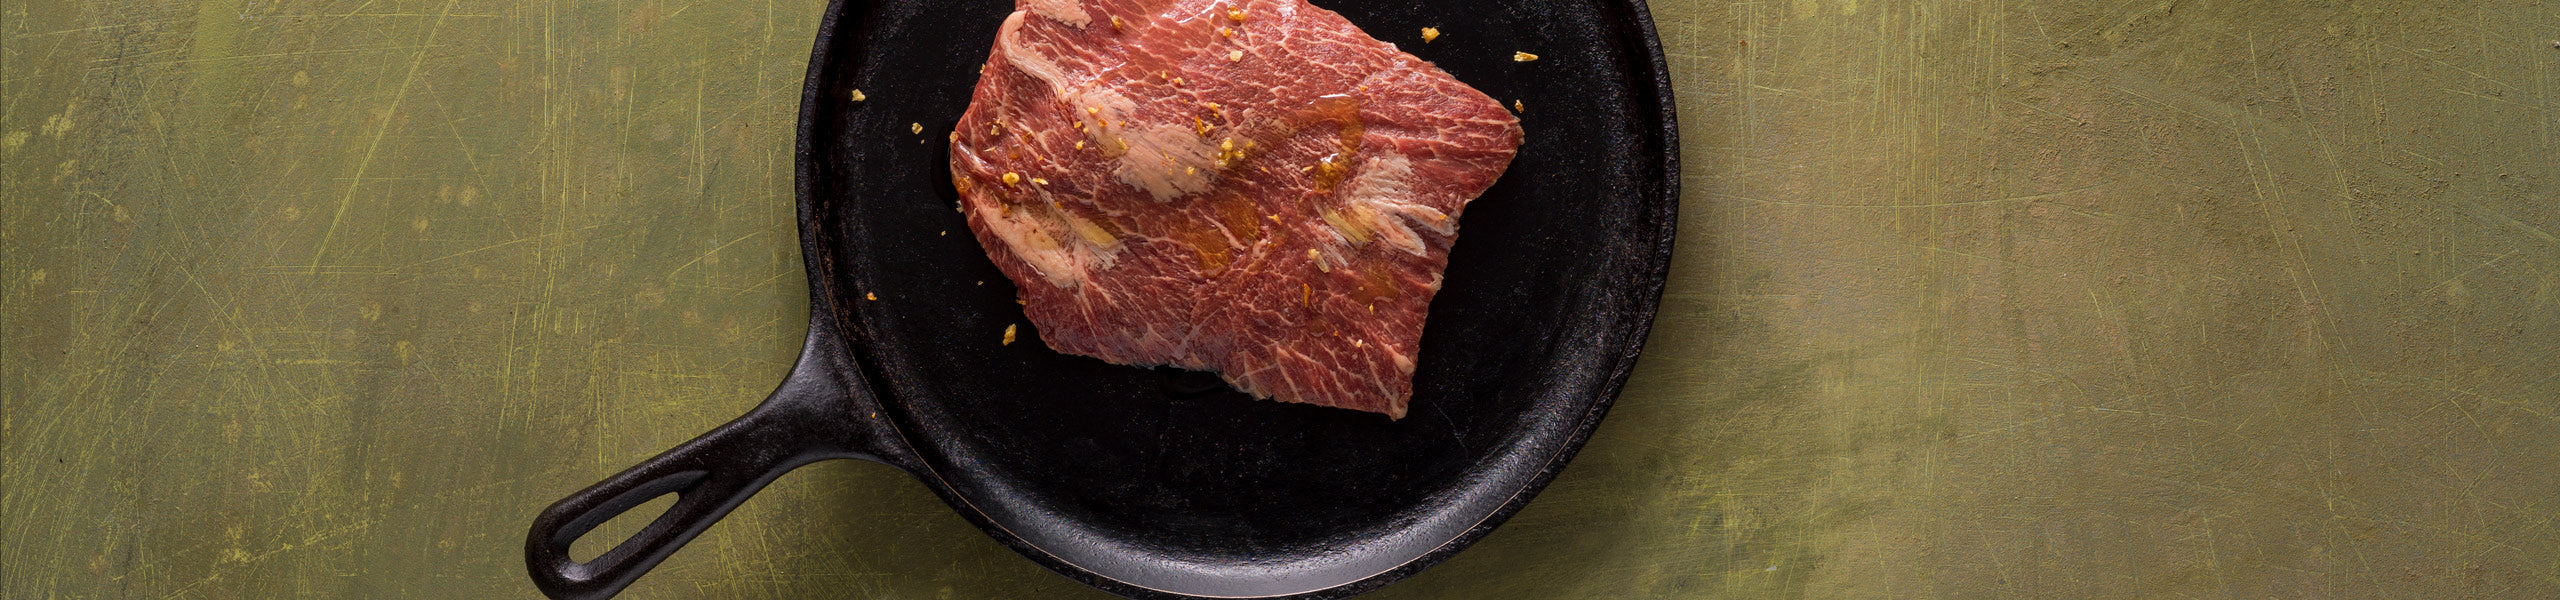 grass-fed steaks and beef cuts